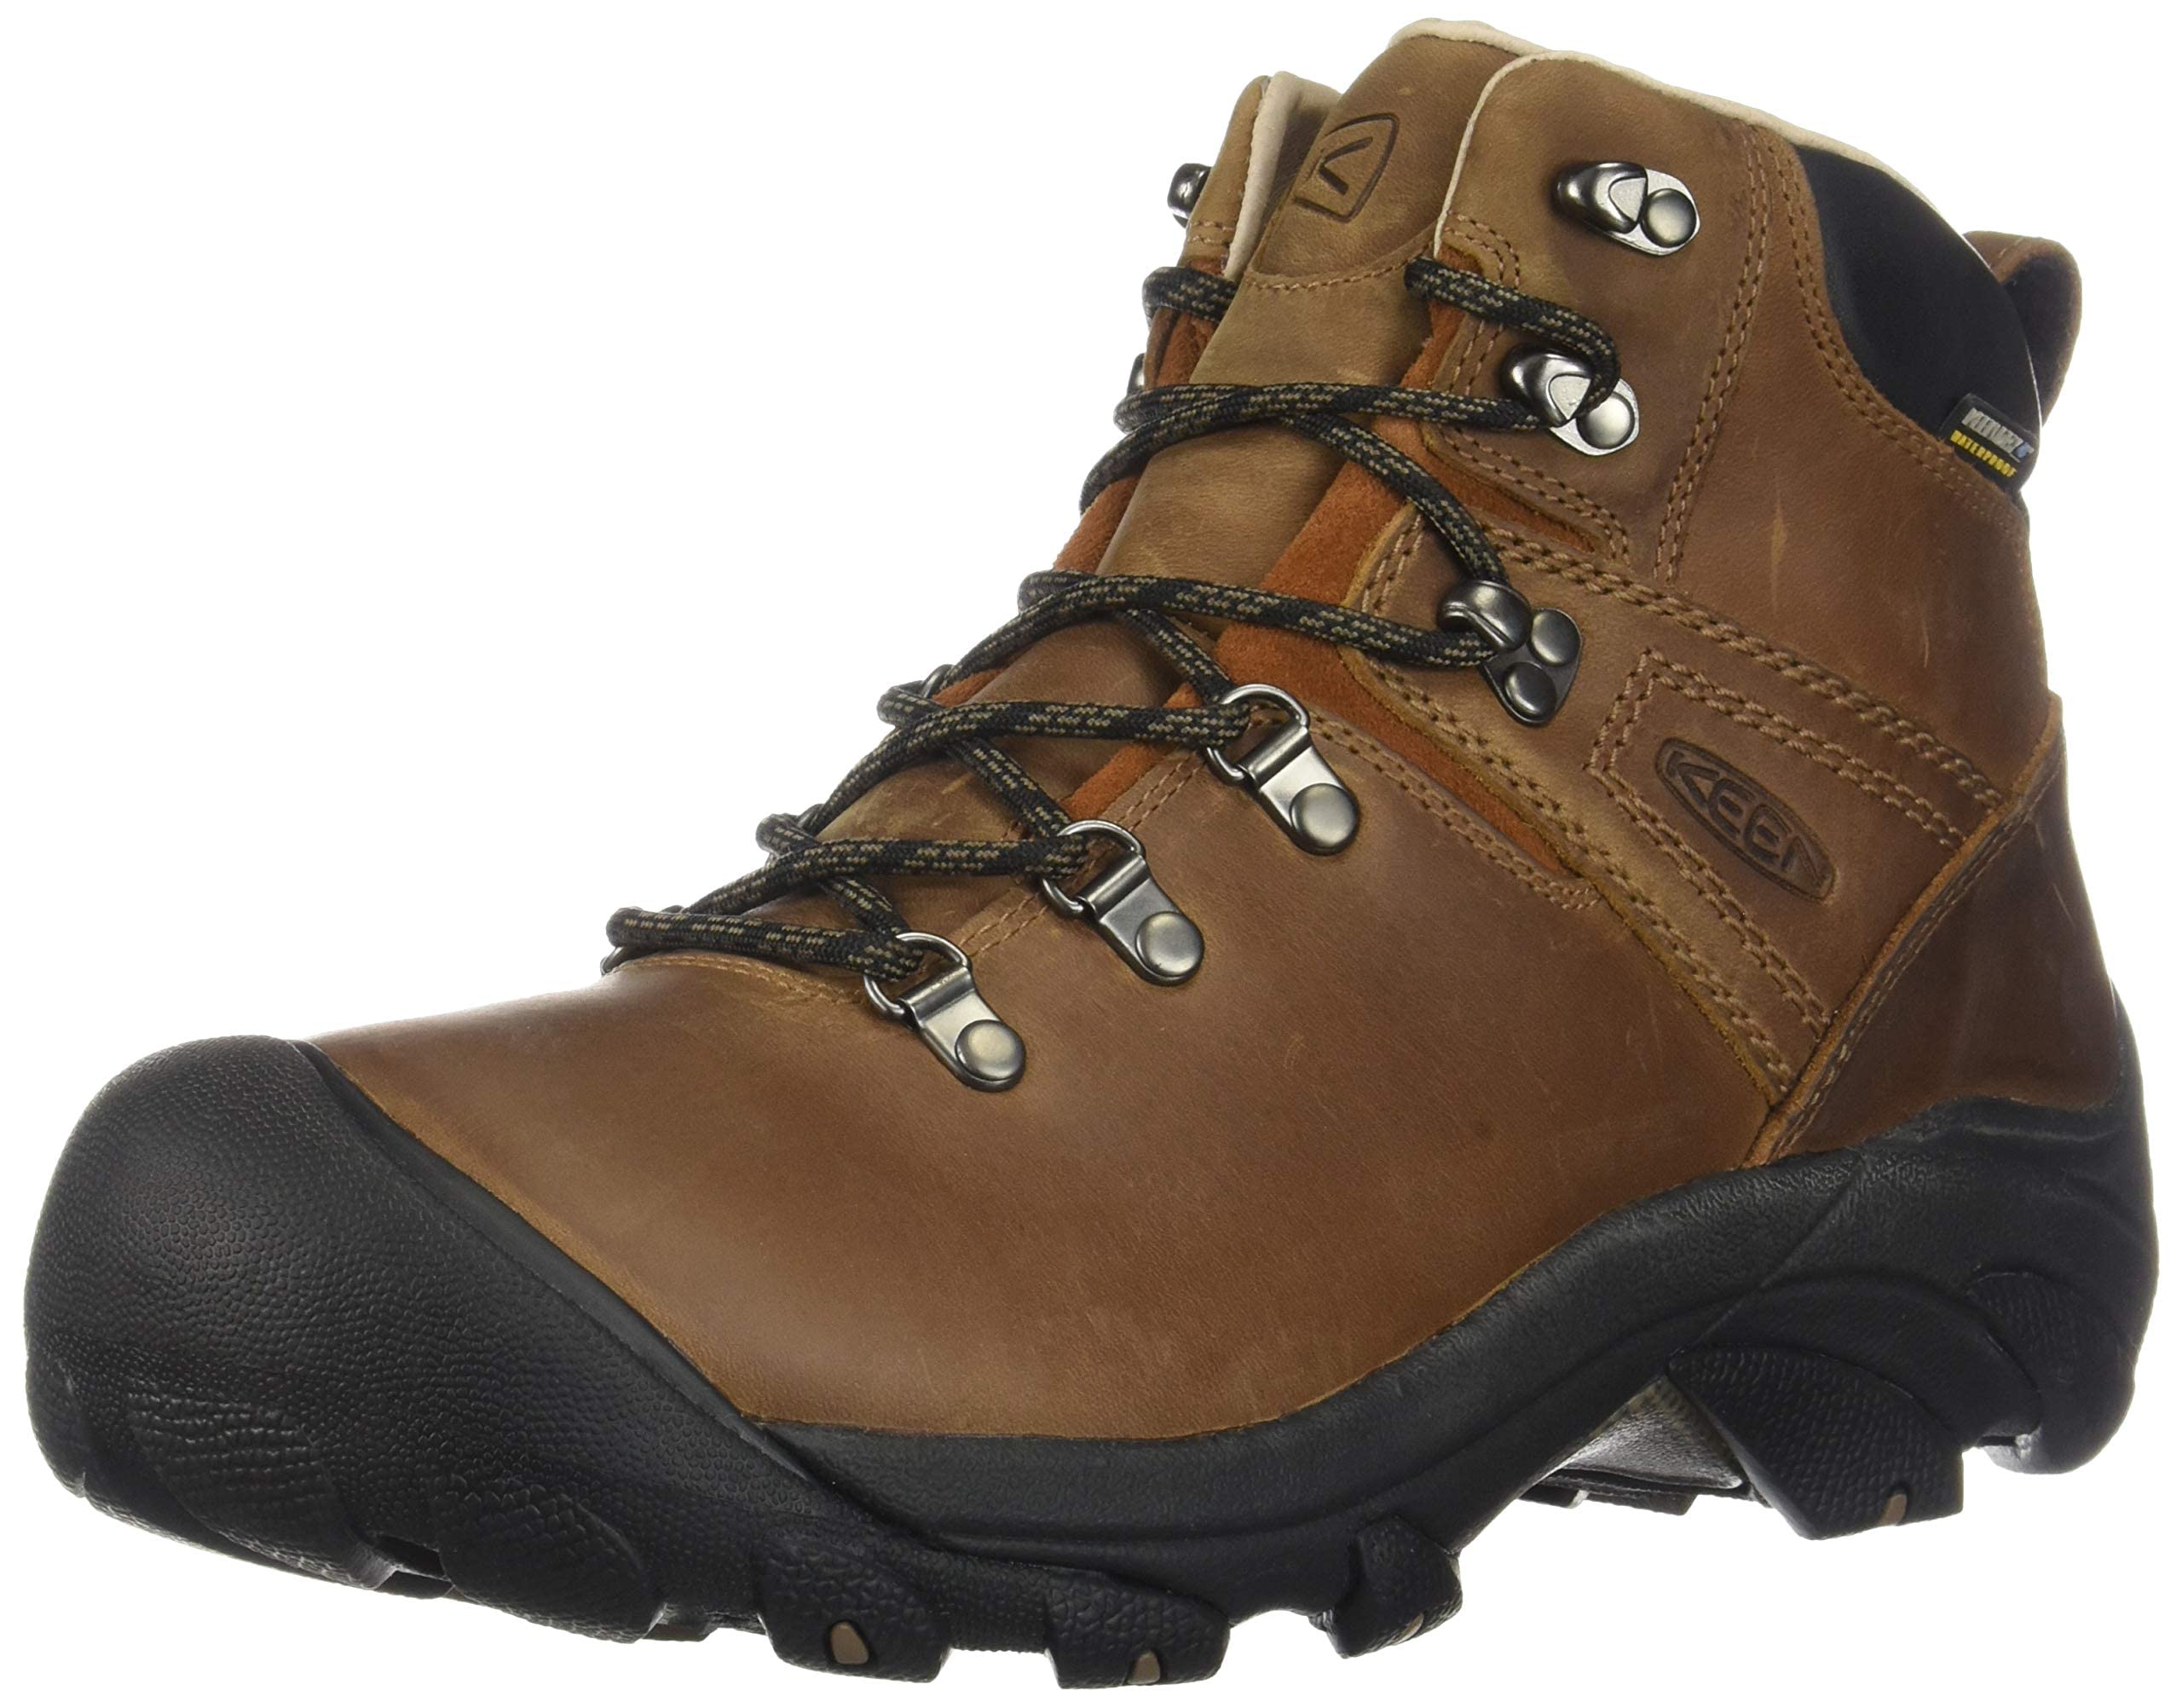 KEEN Men's Pyrenees Mid Height Waterproof Hiking Boots, Syrup, 13